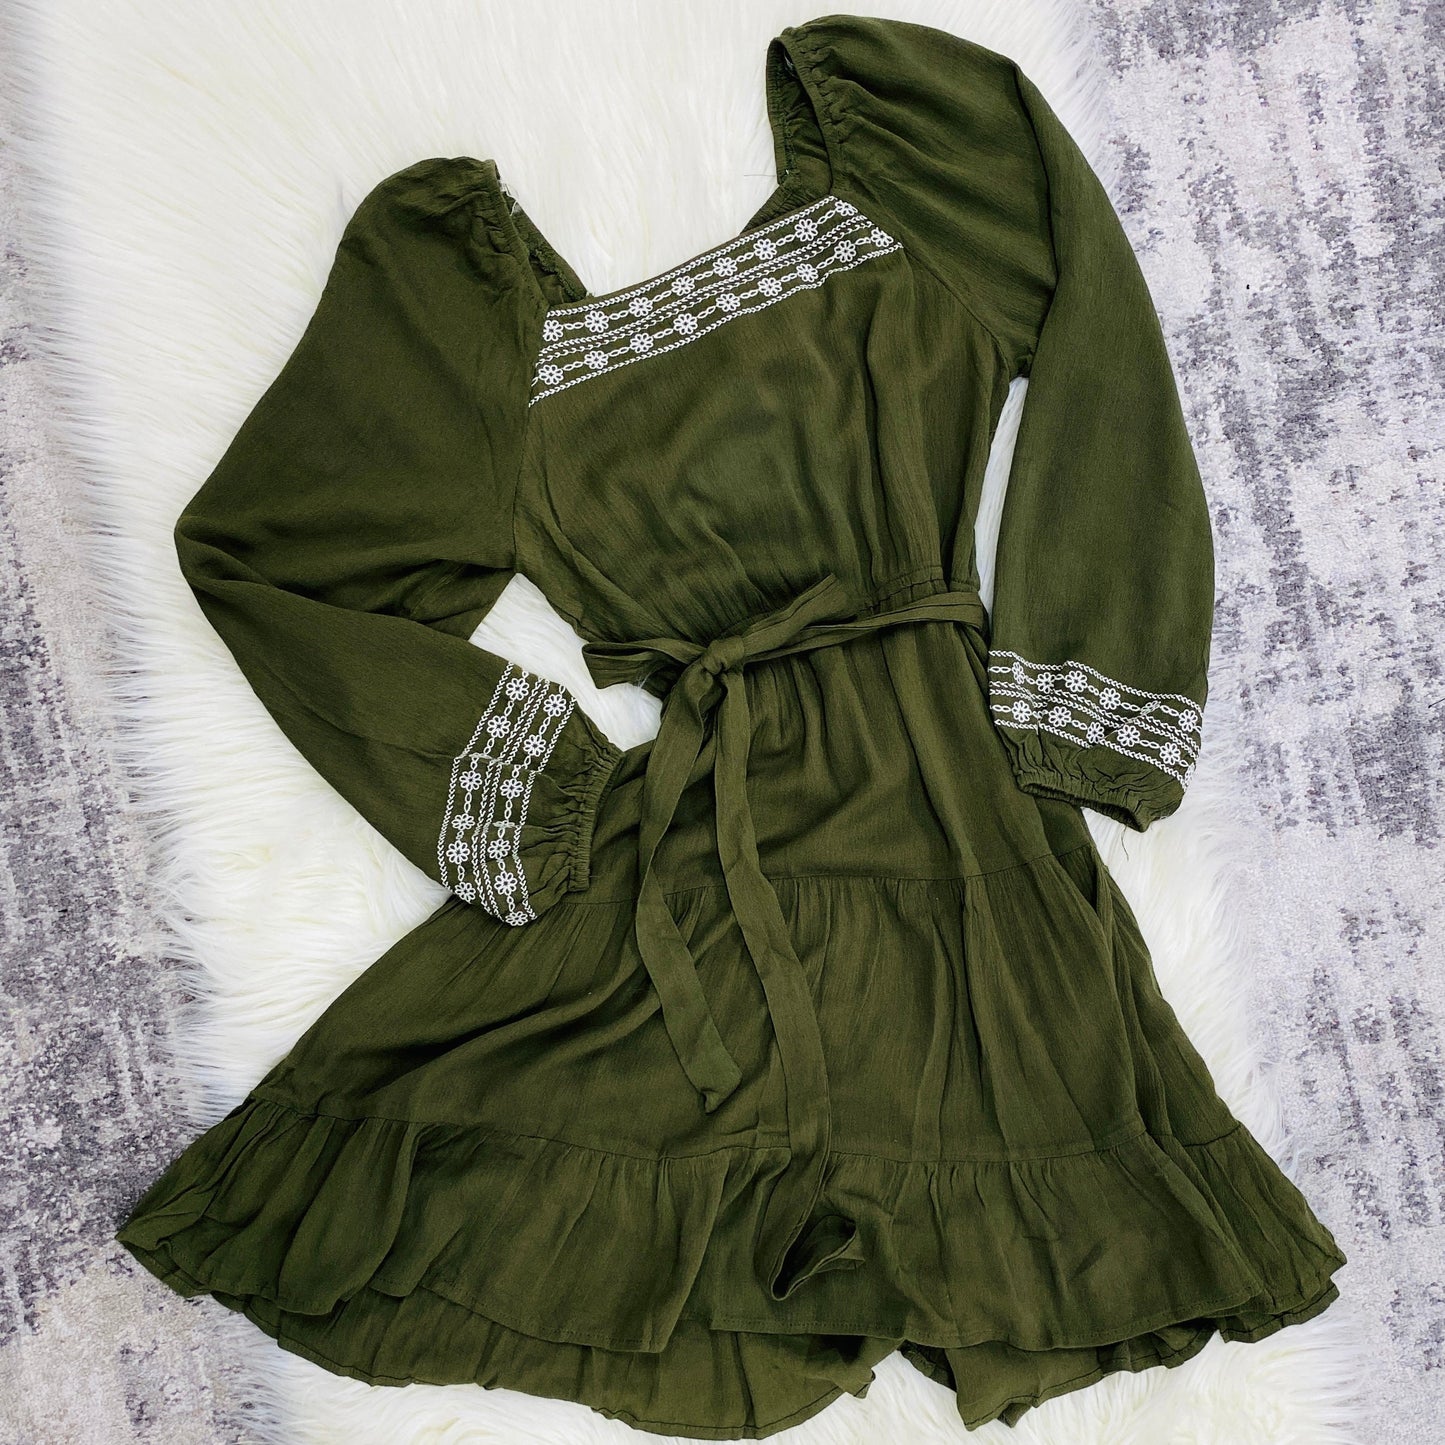  Pair it with leggings and cute boots for a complete look that will have you feeling your best.